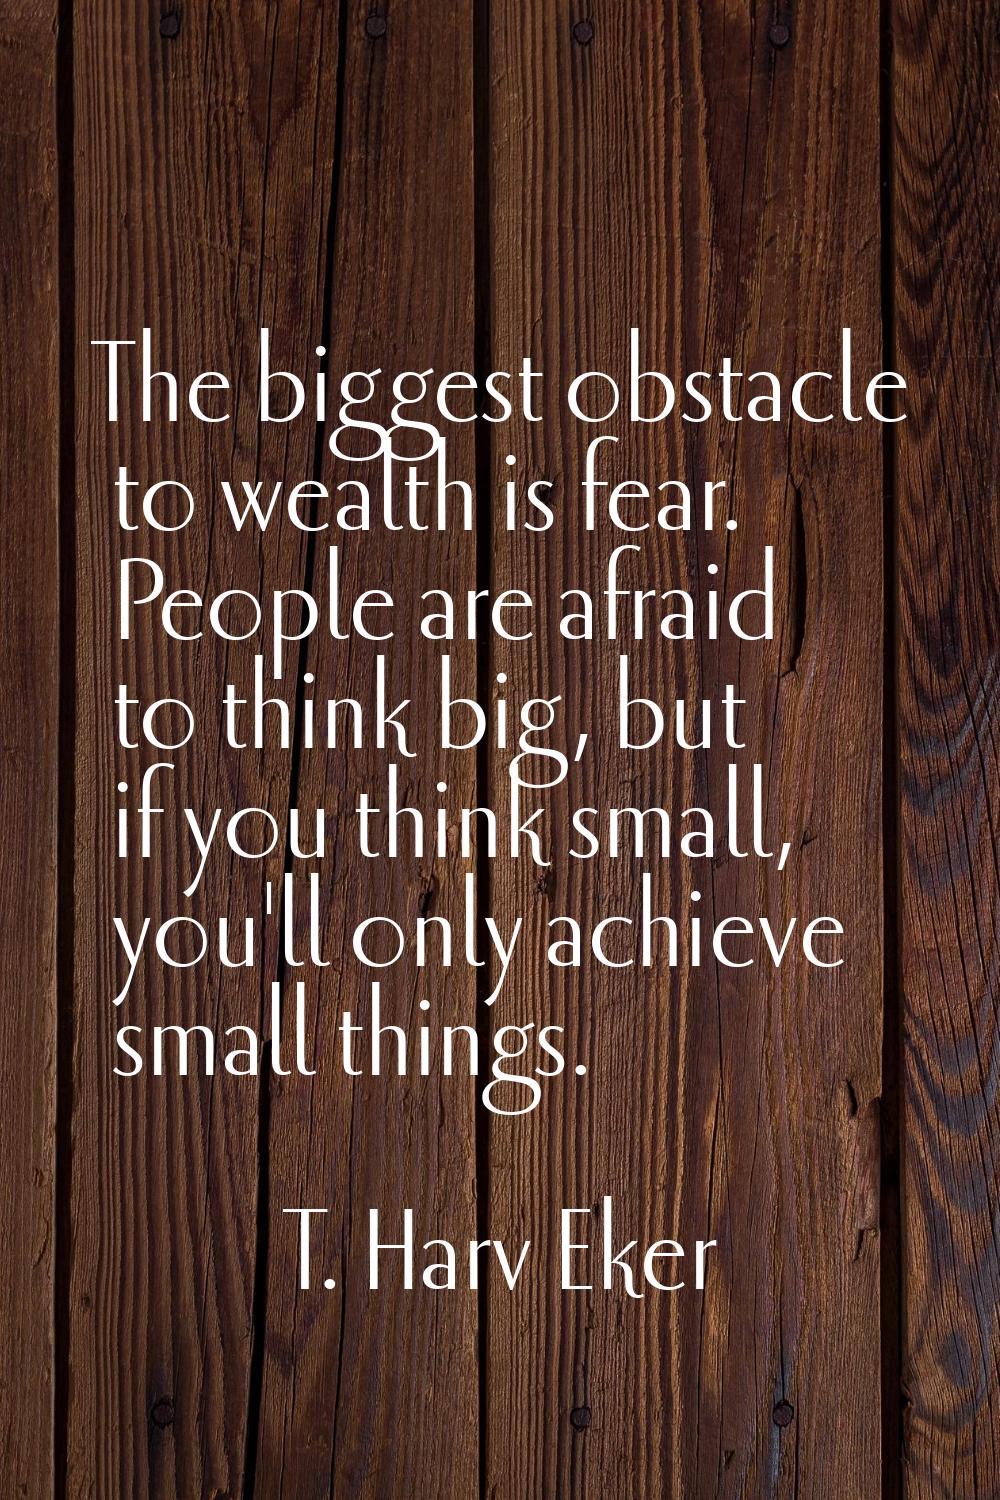 The biggest obstacle to wealth is fear. People are afraid to think big, but if you think small, you